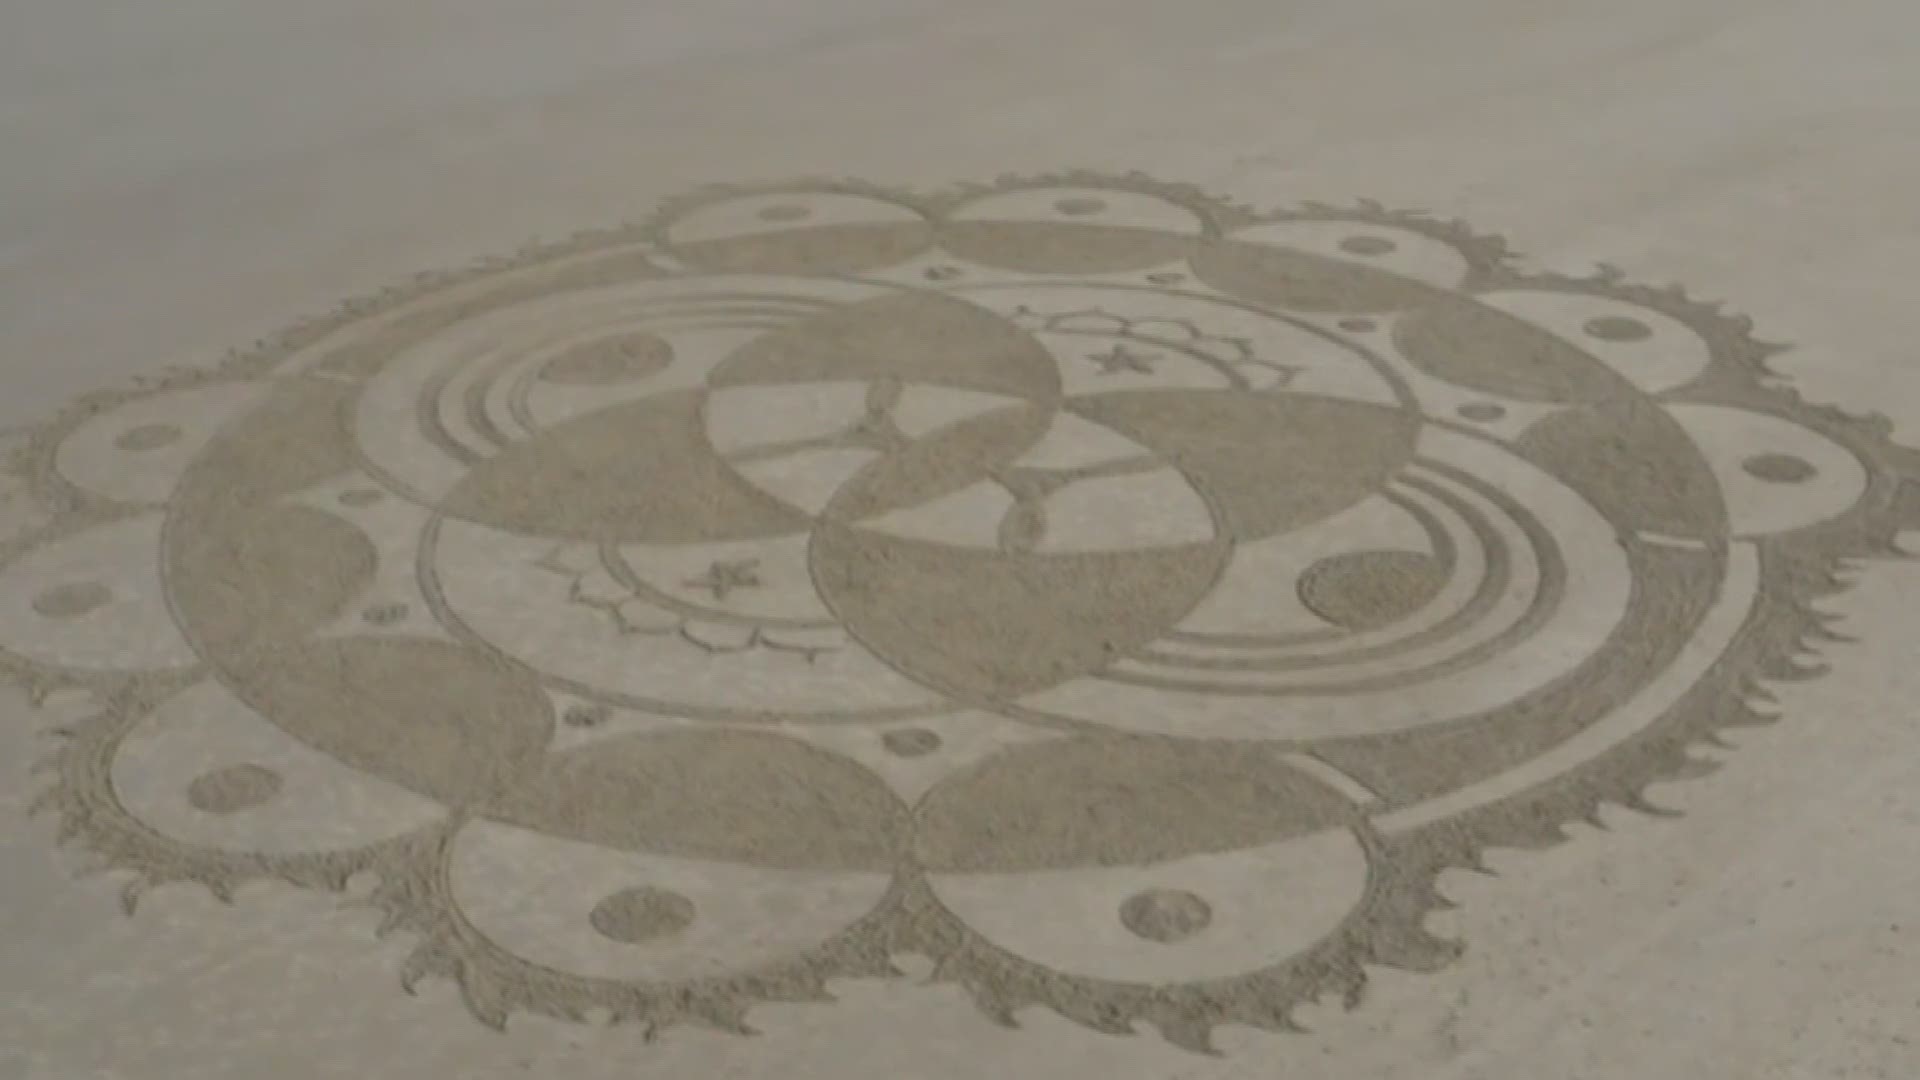 A 57-year-old Massachusetts man is just a kid who still loves to play in the sand. His artwork can be seen on weekends at Wells and Ogunquit Beach.